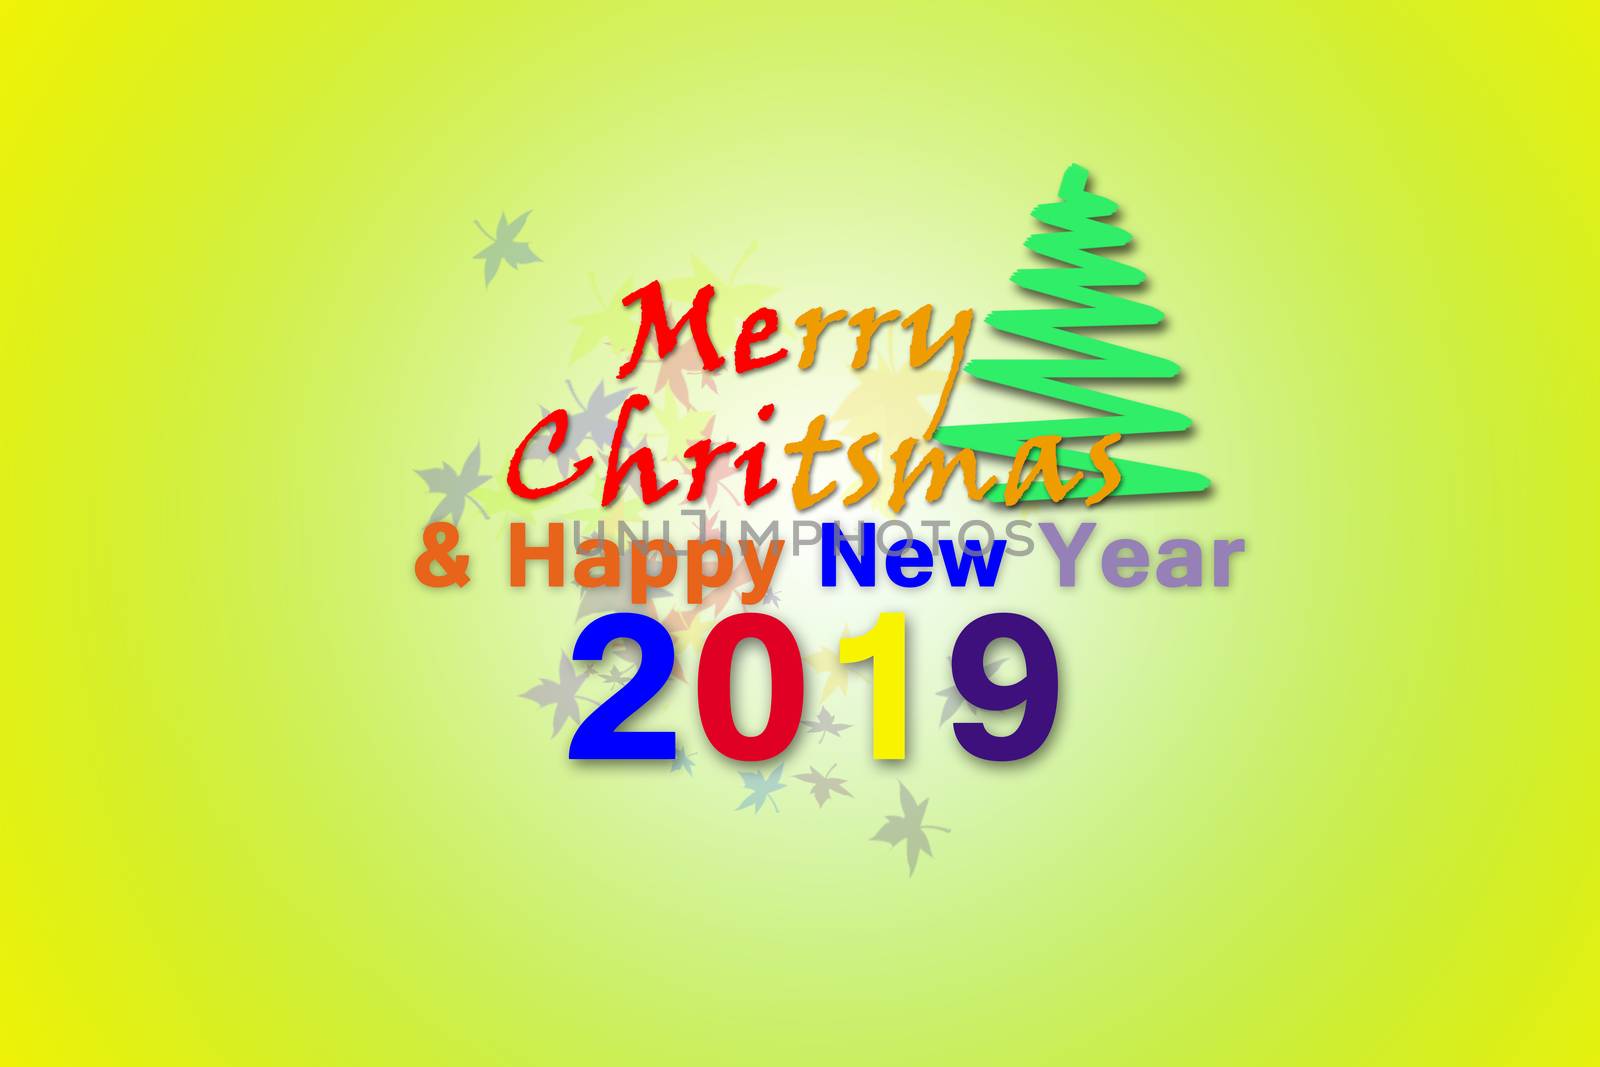 Merry Christmas and Happy New Year 2019 with colour full Lettering design on lite yellow background by lakshmiprasad.maski@gmai.com